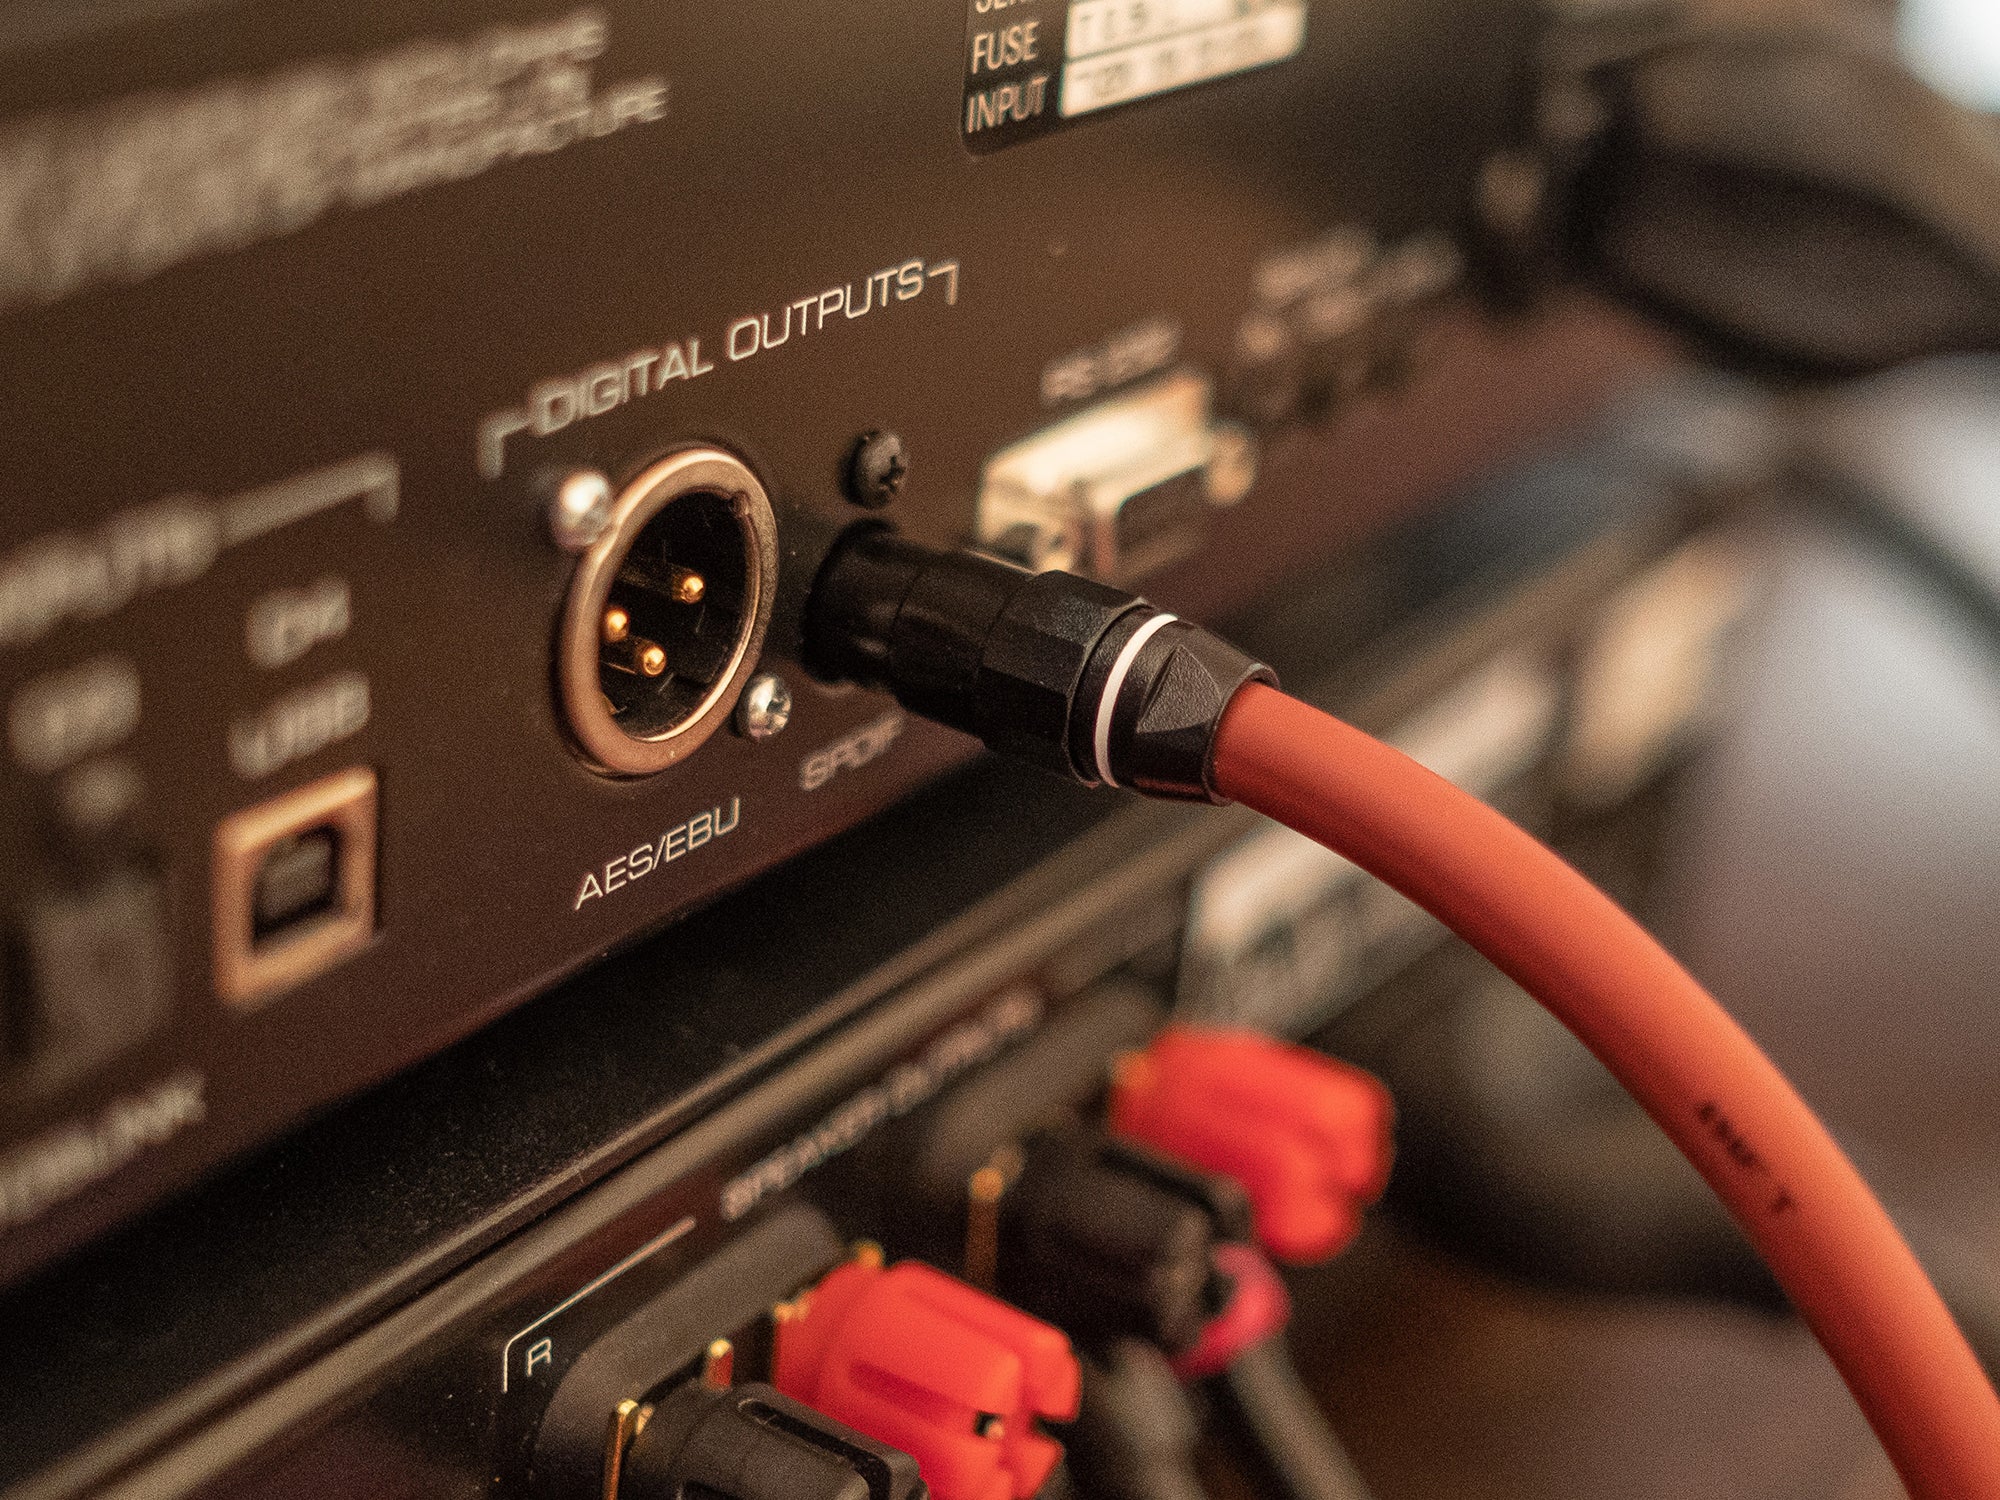 A close up of an audio device with a red cable connected to it.